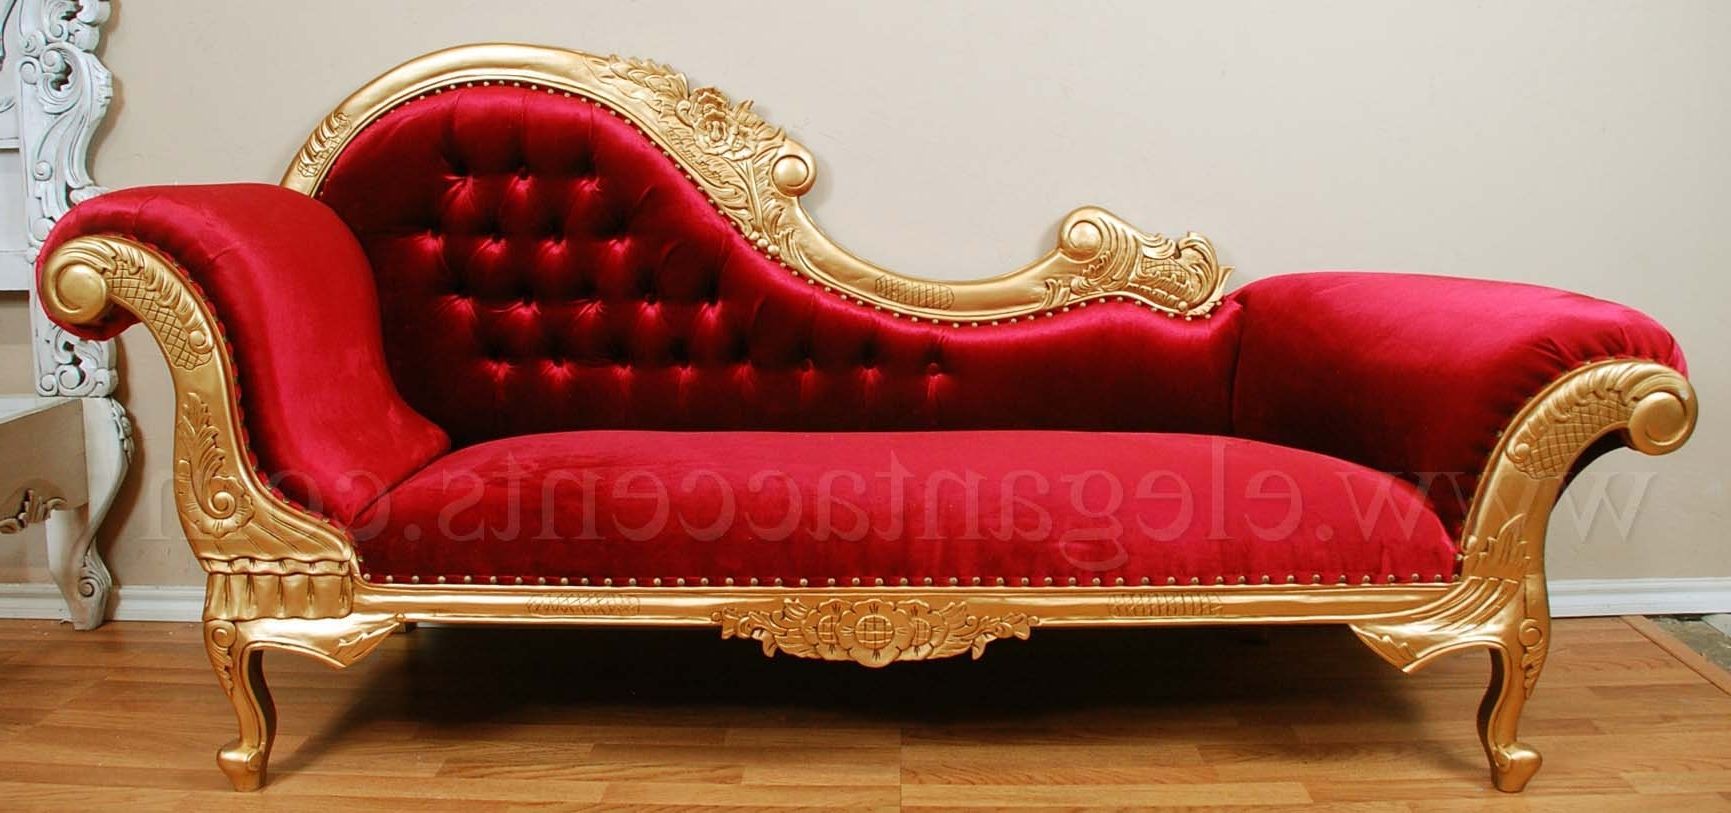 Most Recently Released Victorian Chaise Lounges Pertaining To Impressive On Victorian Chaise Lounge With Victorian Chaise Gold (View 3 of 15)